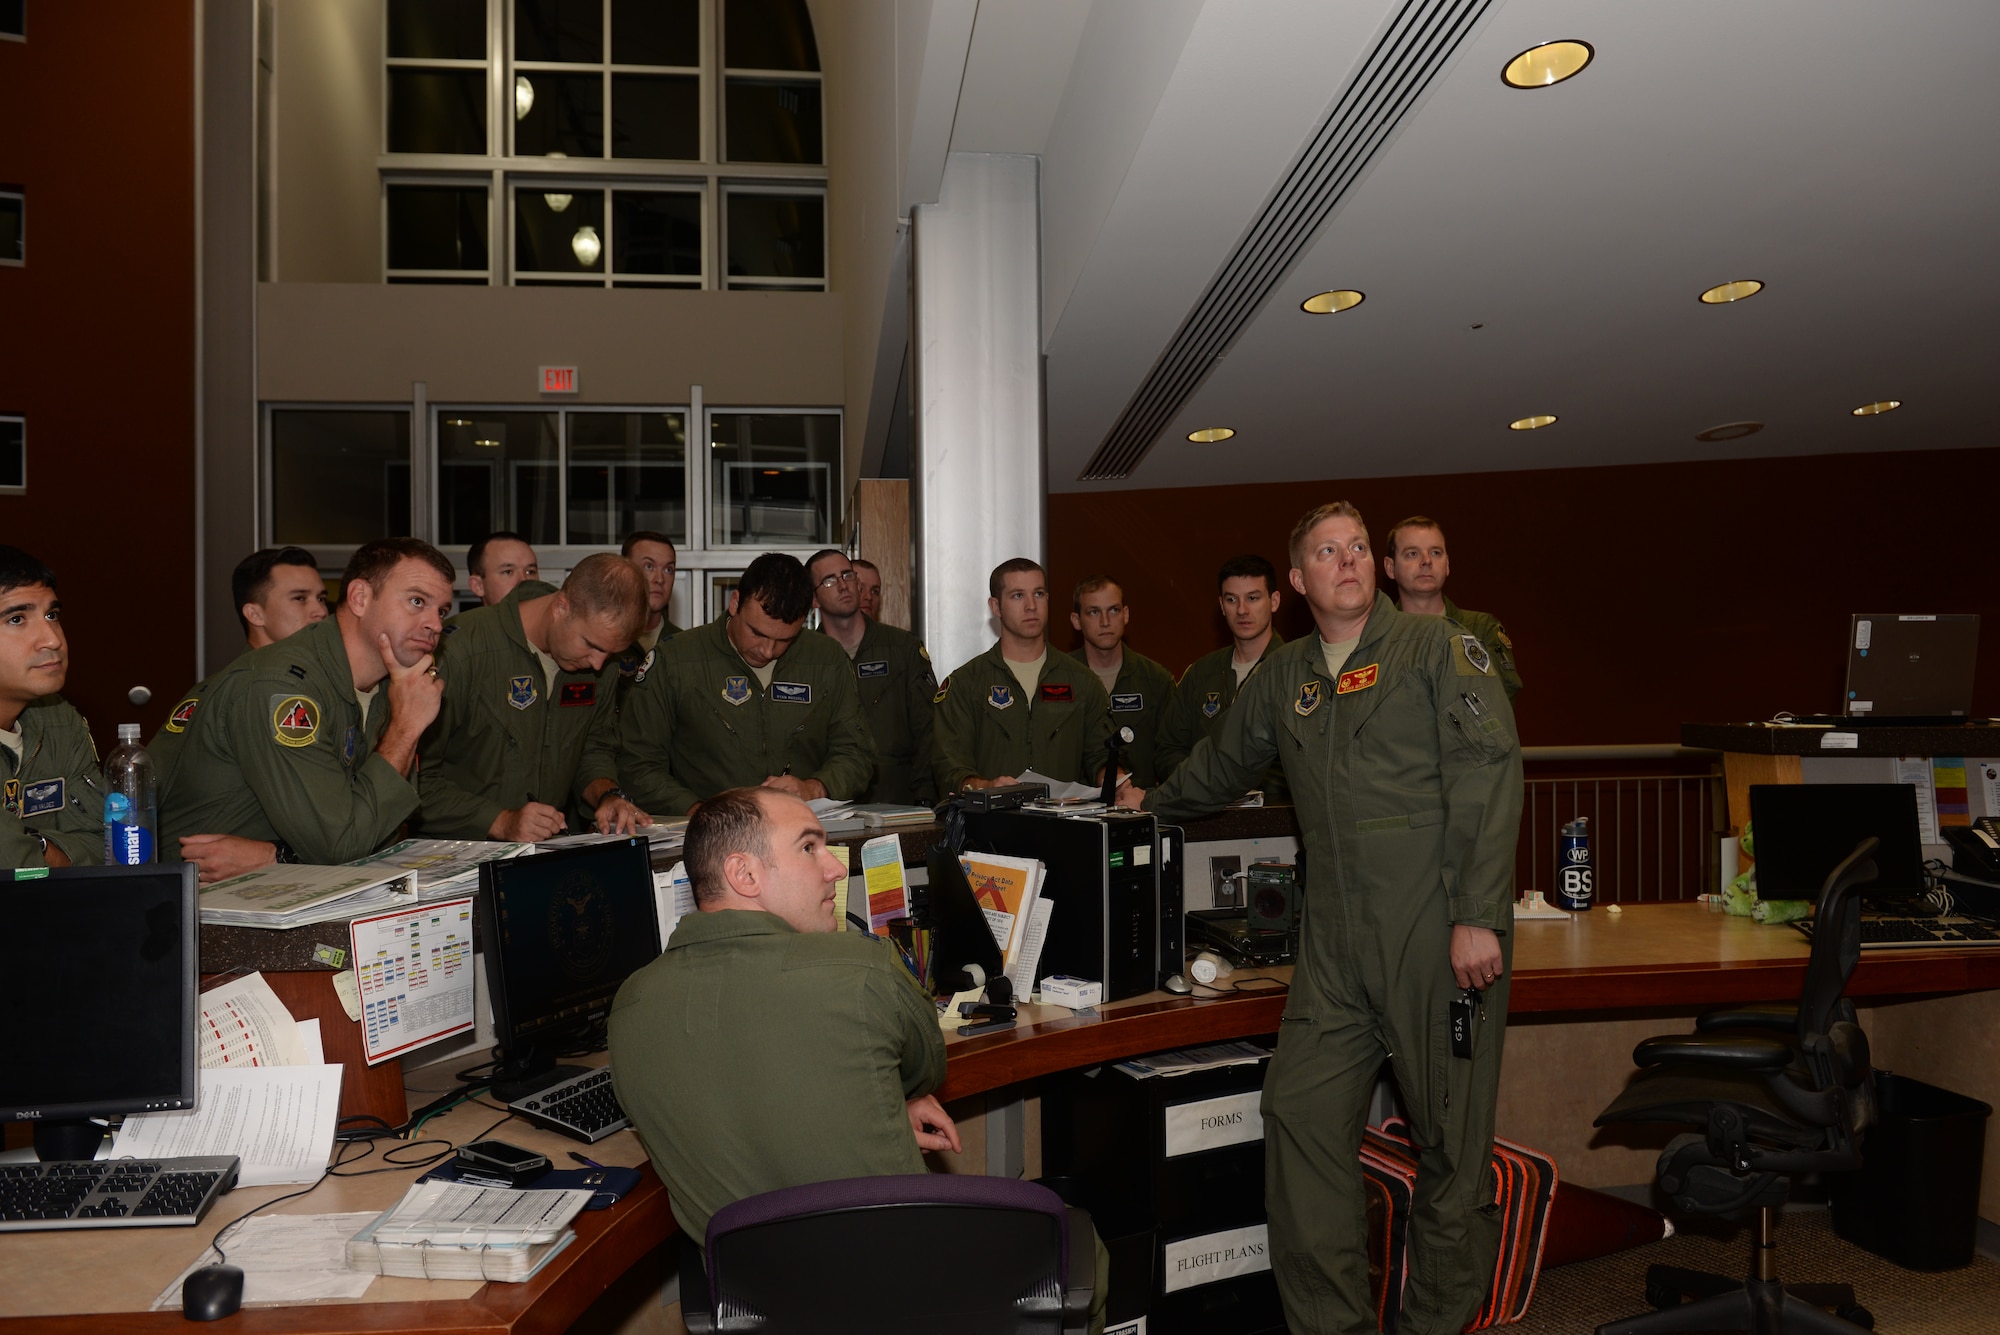 Aircrews from the 2nd Bomb Wing, Barksdale Air Force Base, La., attend a step brief at Ellsworth Air Force Base, S.D., Aug. 11, 2014. Following the brief, a B-52H Stratofortress and seven-person crew from Barksdale’s 96th Bomb Squadron, flew a nonstop, 15.5-hour round-trip intelligence, surveillance and reconnaissance mission from the United States to the U.S. Southern Command area of operations as part of PANAMAX 2014, an annual, U.S. Southern Command-sponsored multinational exercise. (U.S. Air Force photo/Airman 1st Class Rebecca Imwalle)